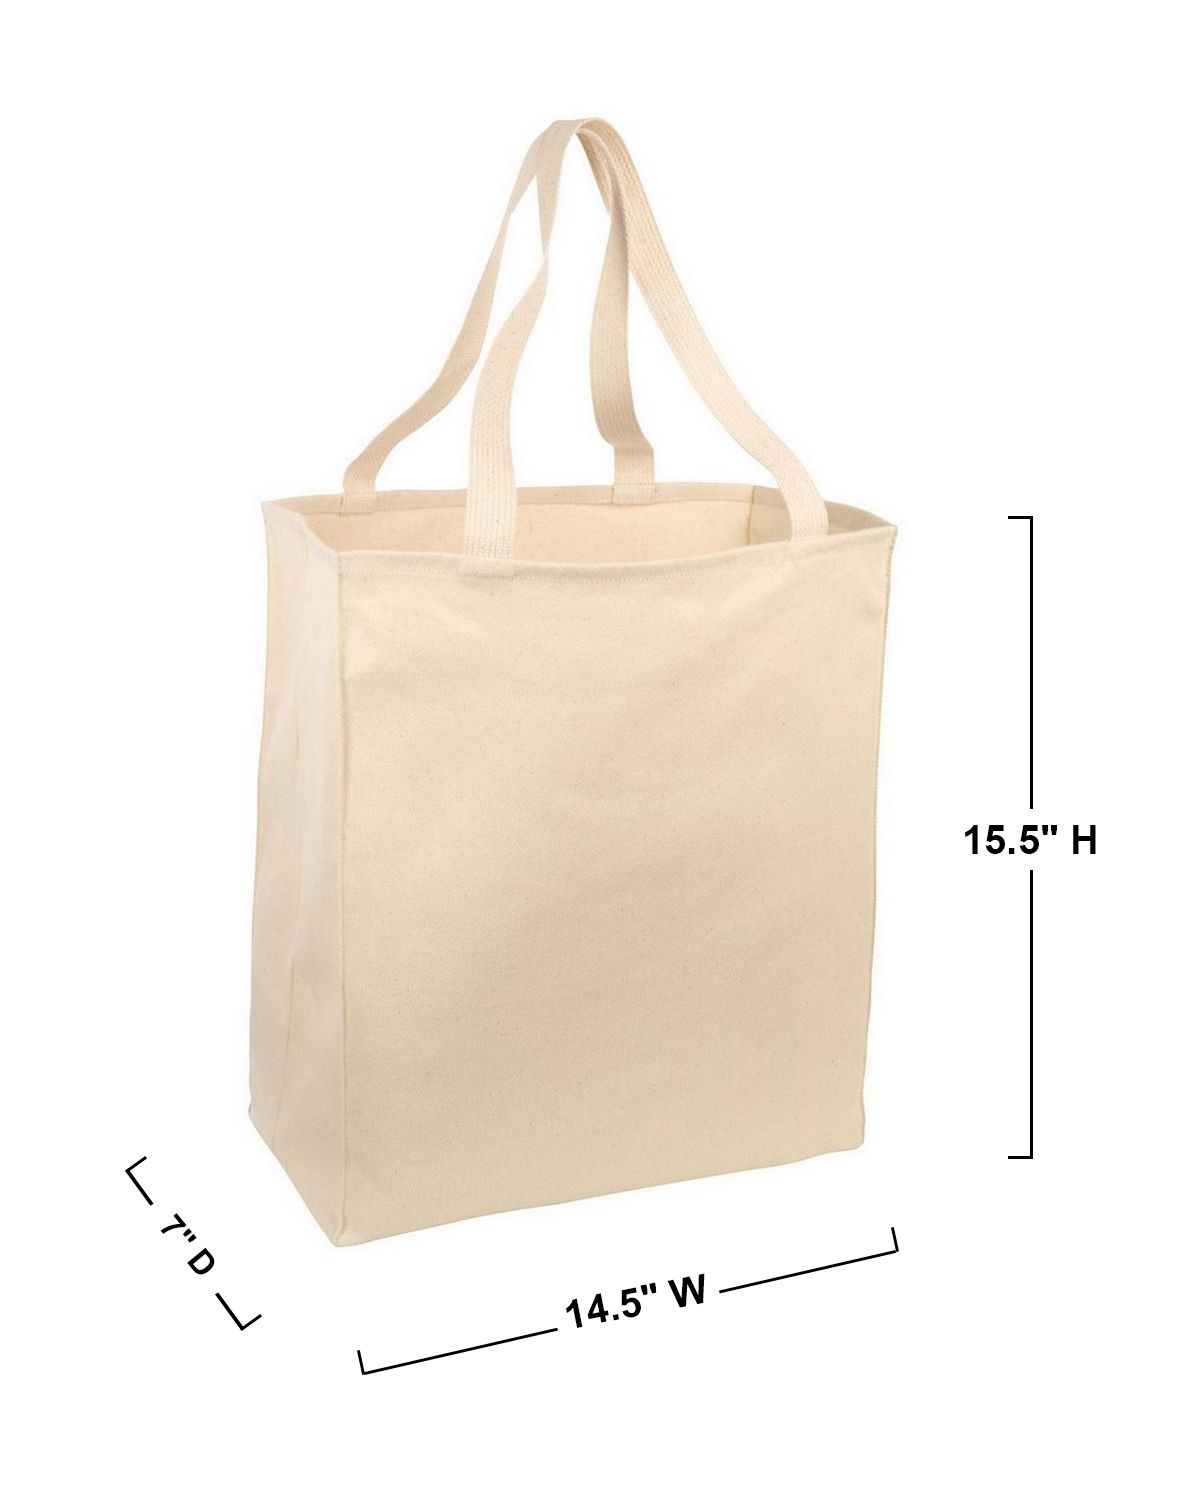 Port Authority B110 Over the Shoulder Grocery Tote